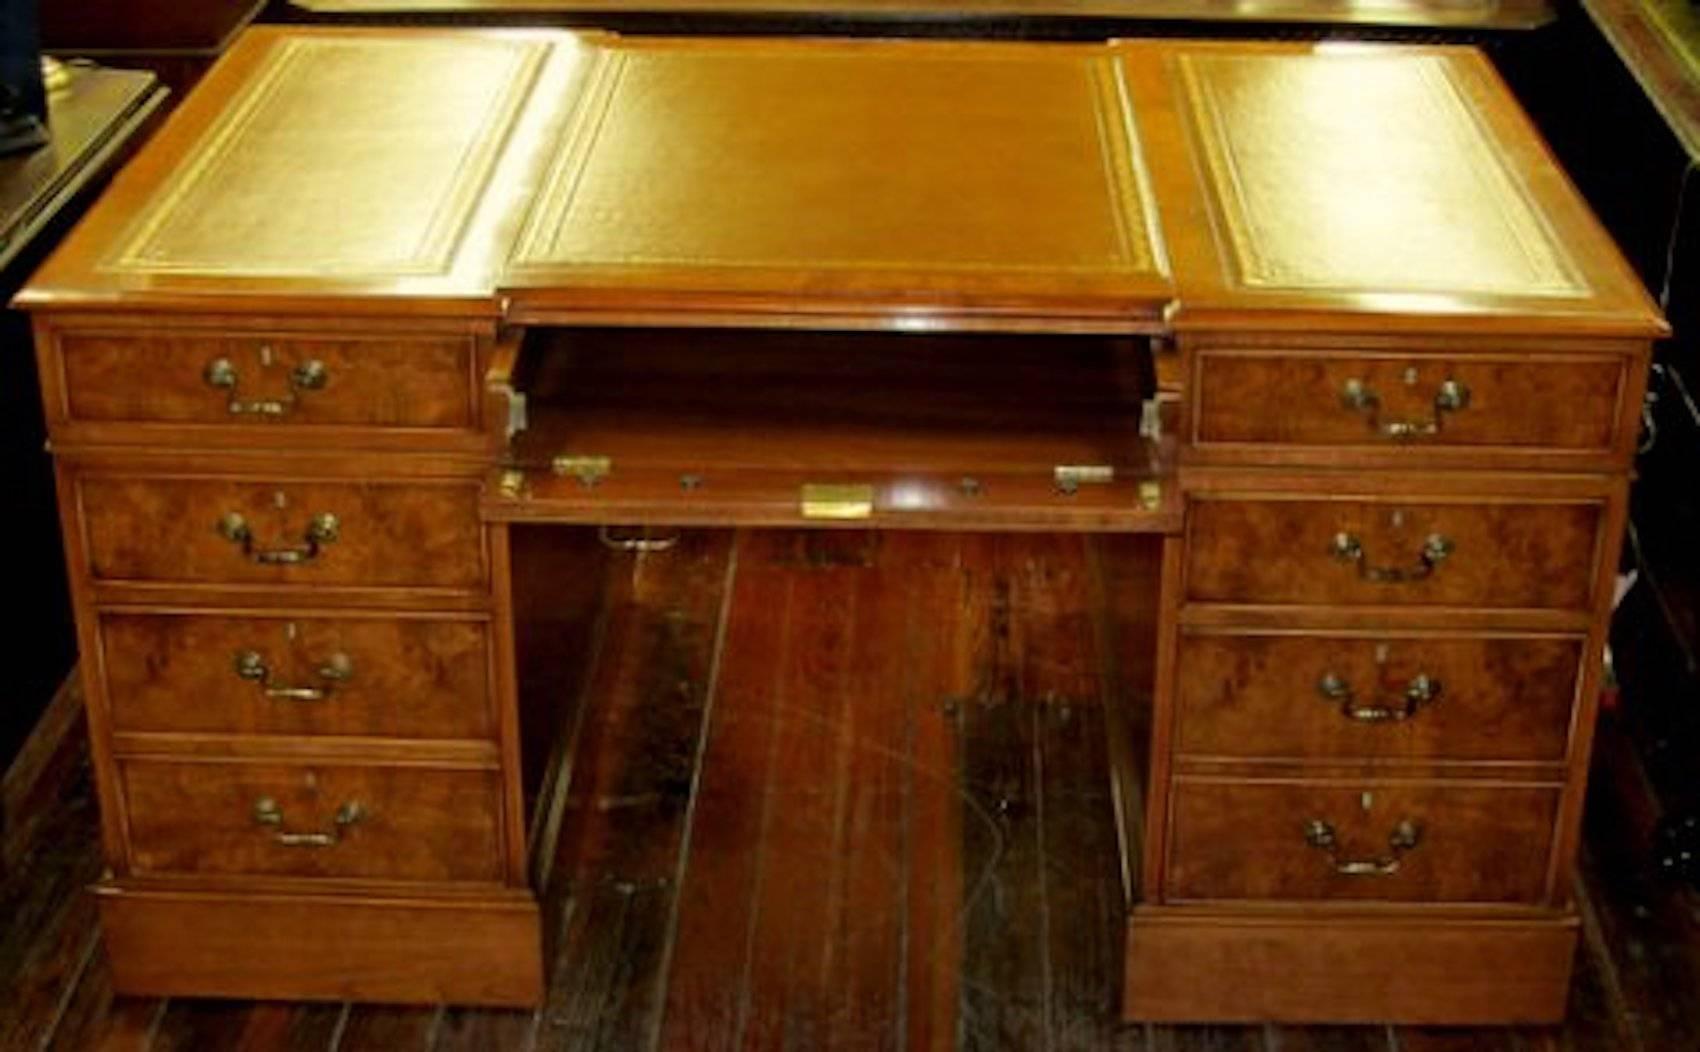 Superb quality English bench made inlaid burr walnut Chippendale style leather top pedestal partner's desk, antique copy. Please note handsome hand tooled and gilt leather; lower right hand file drawer; drop-down centre keyboard drawer with 